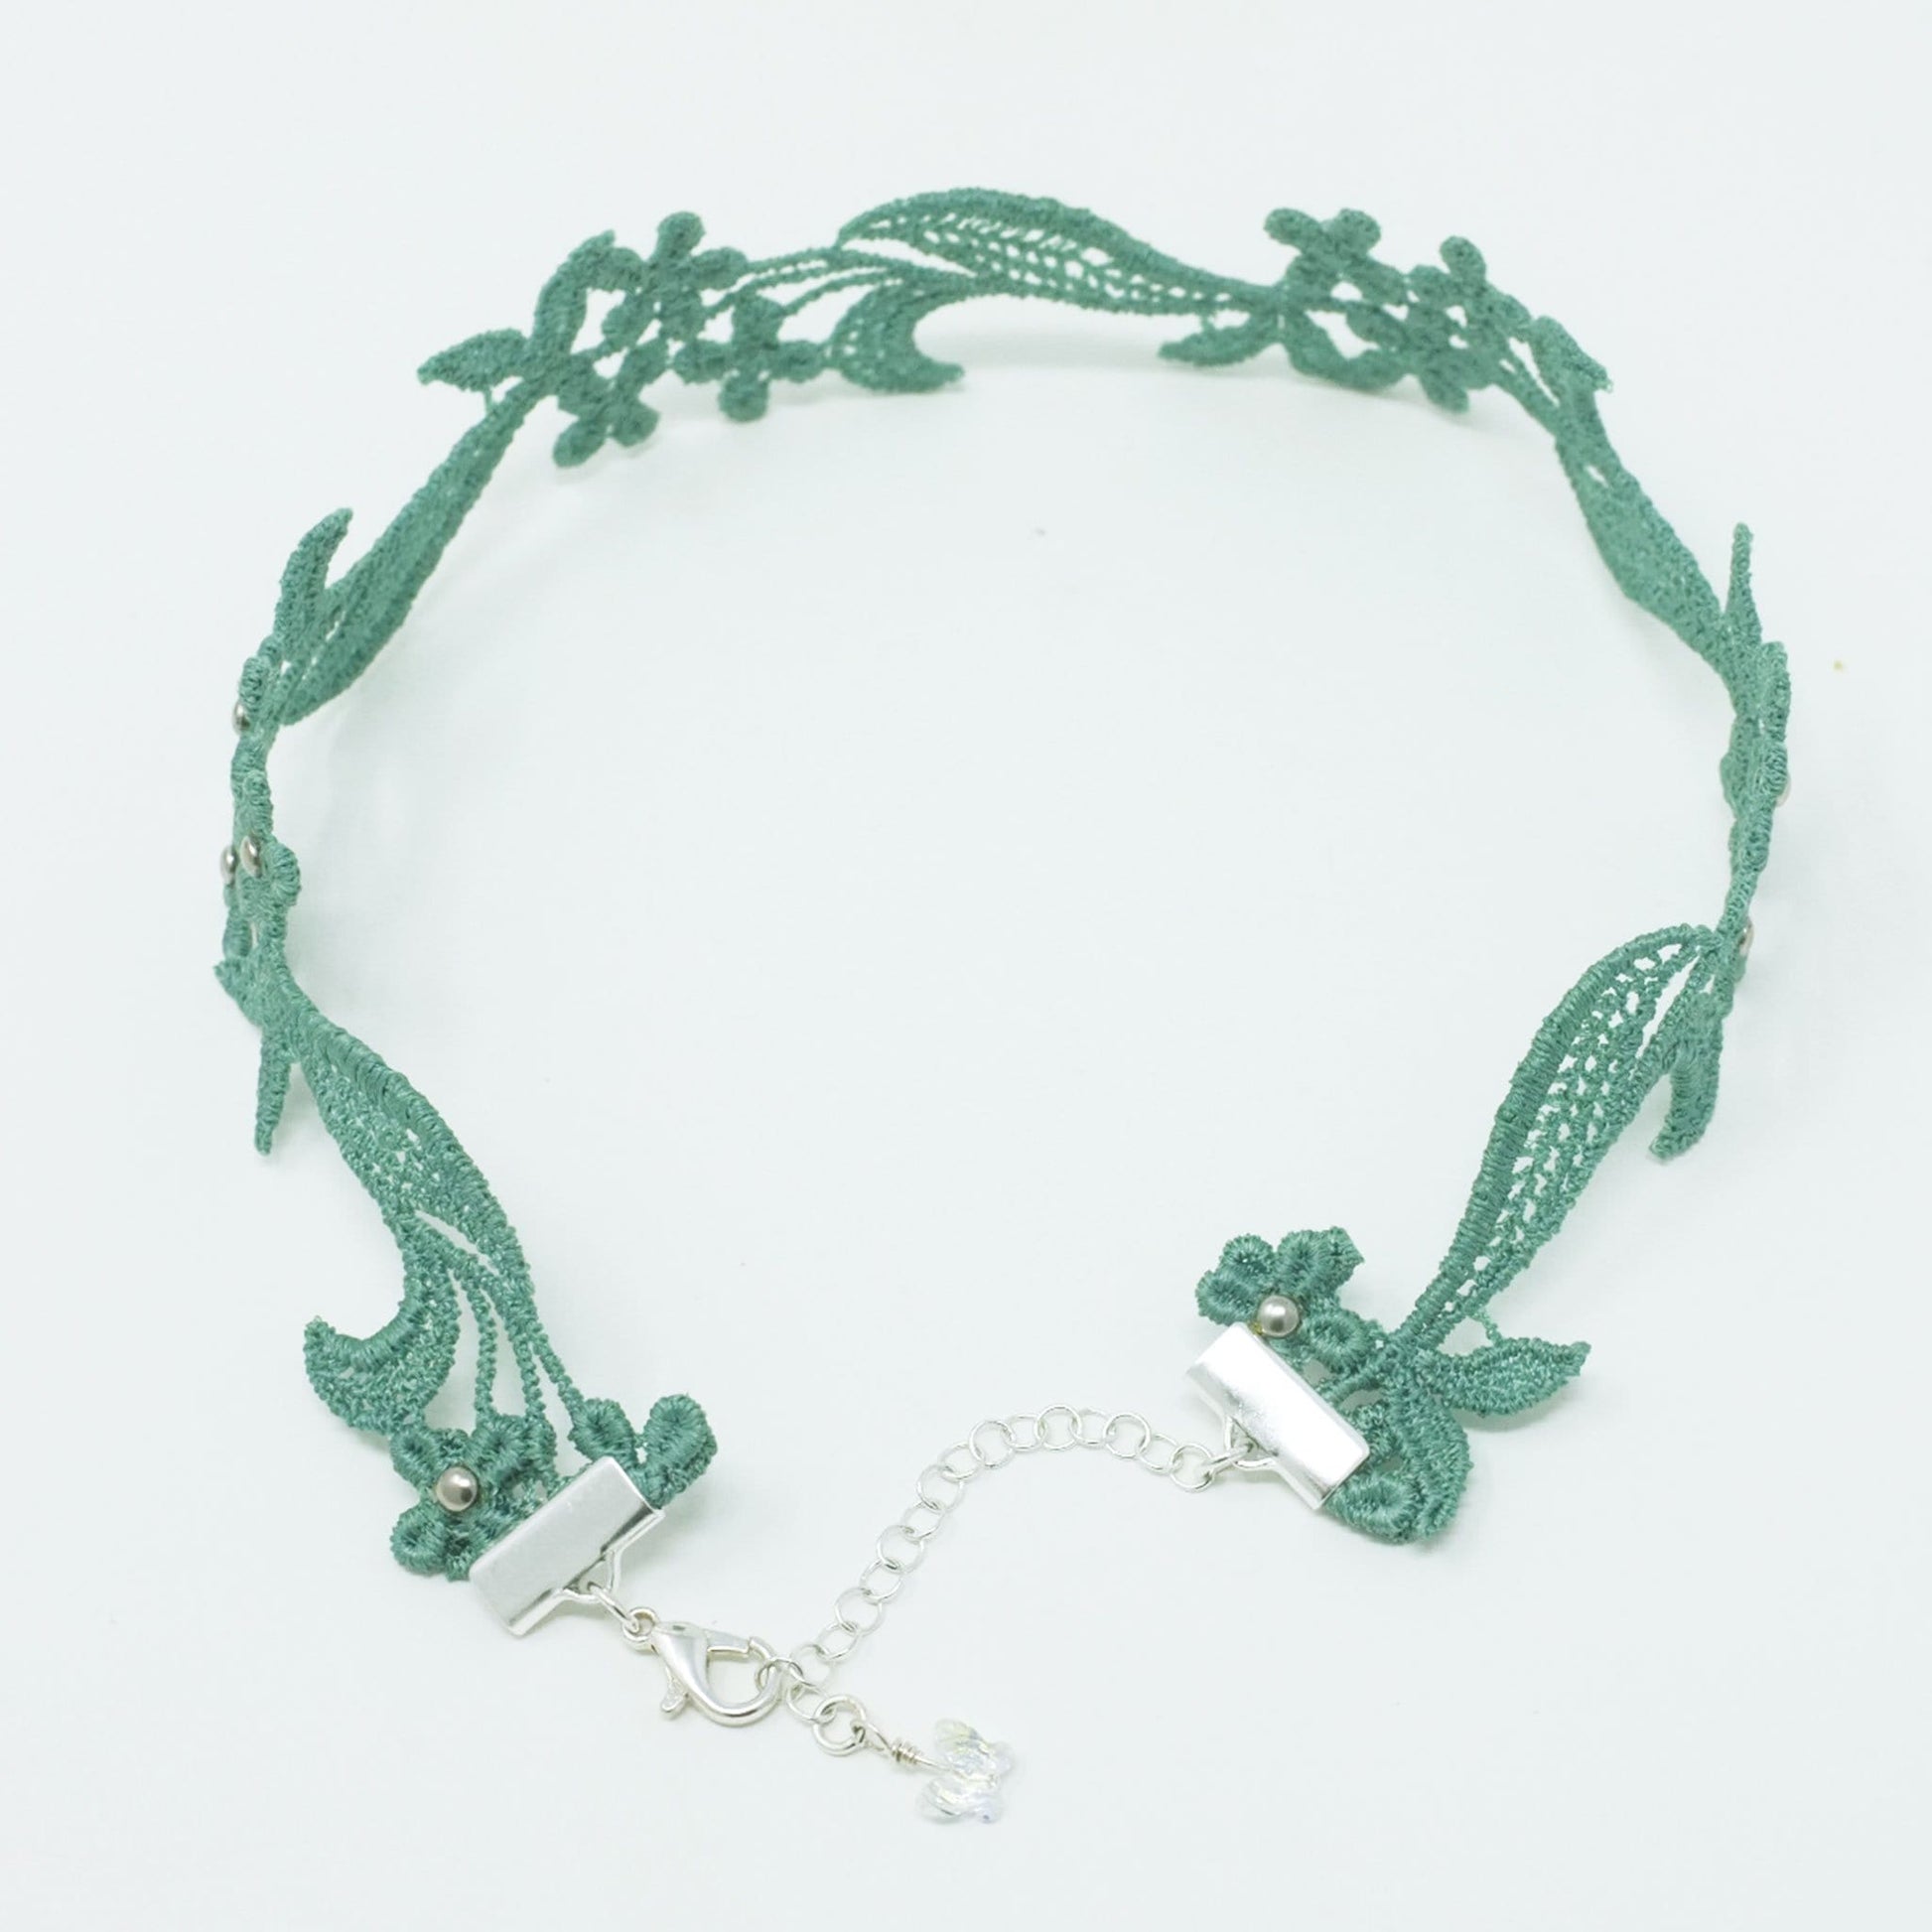 Choker made with Seafoam Green Floral Lace and Silver Beads